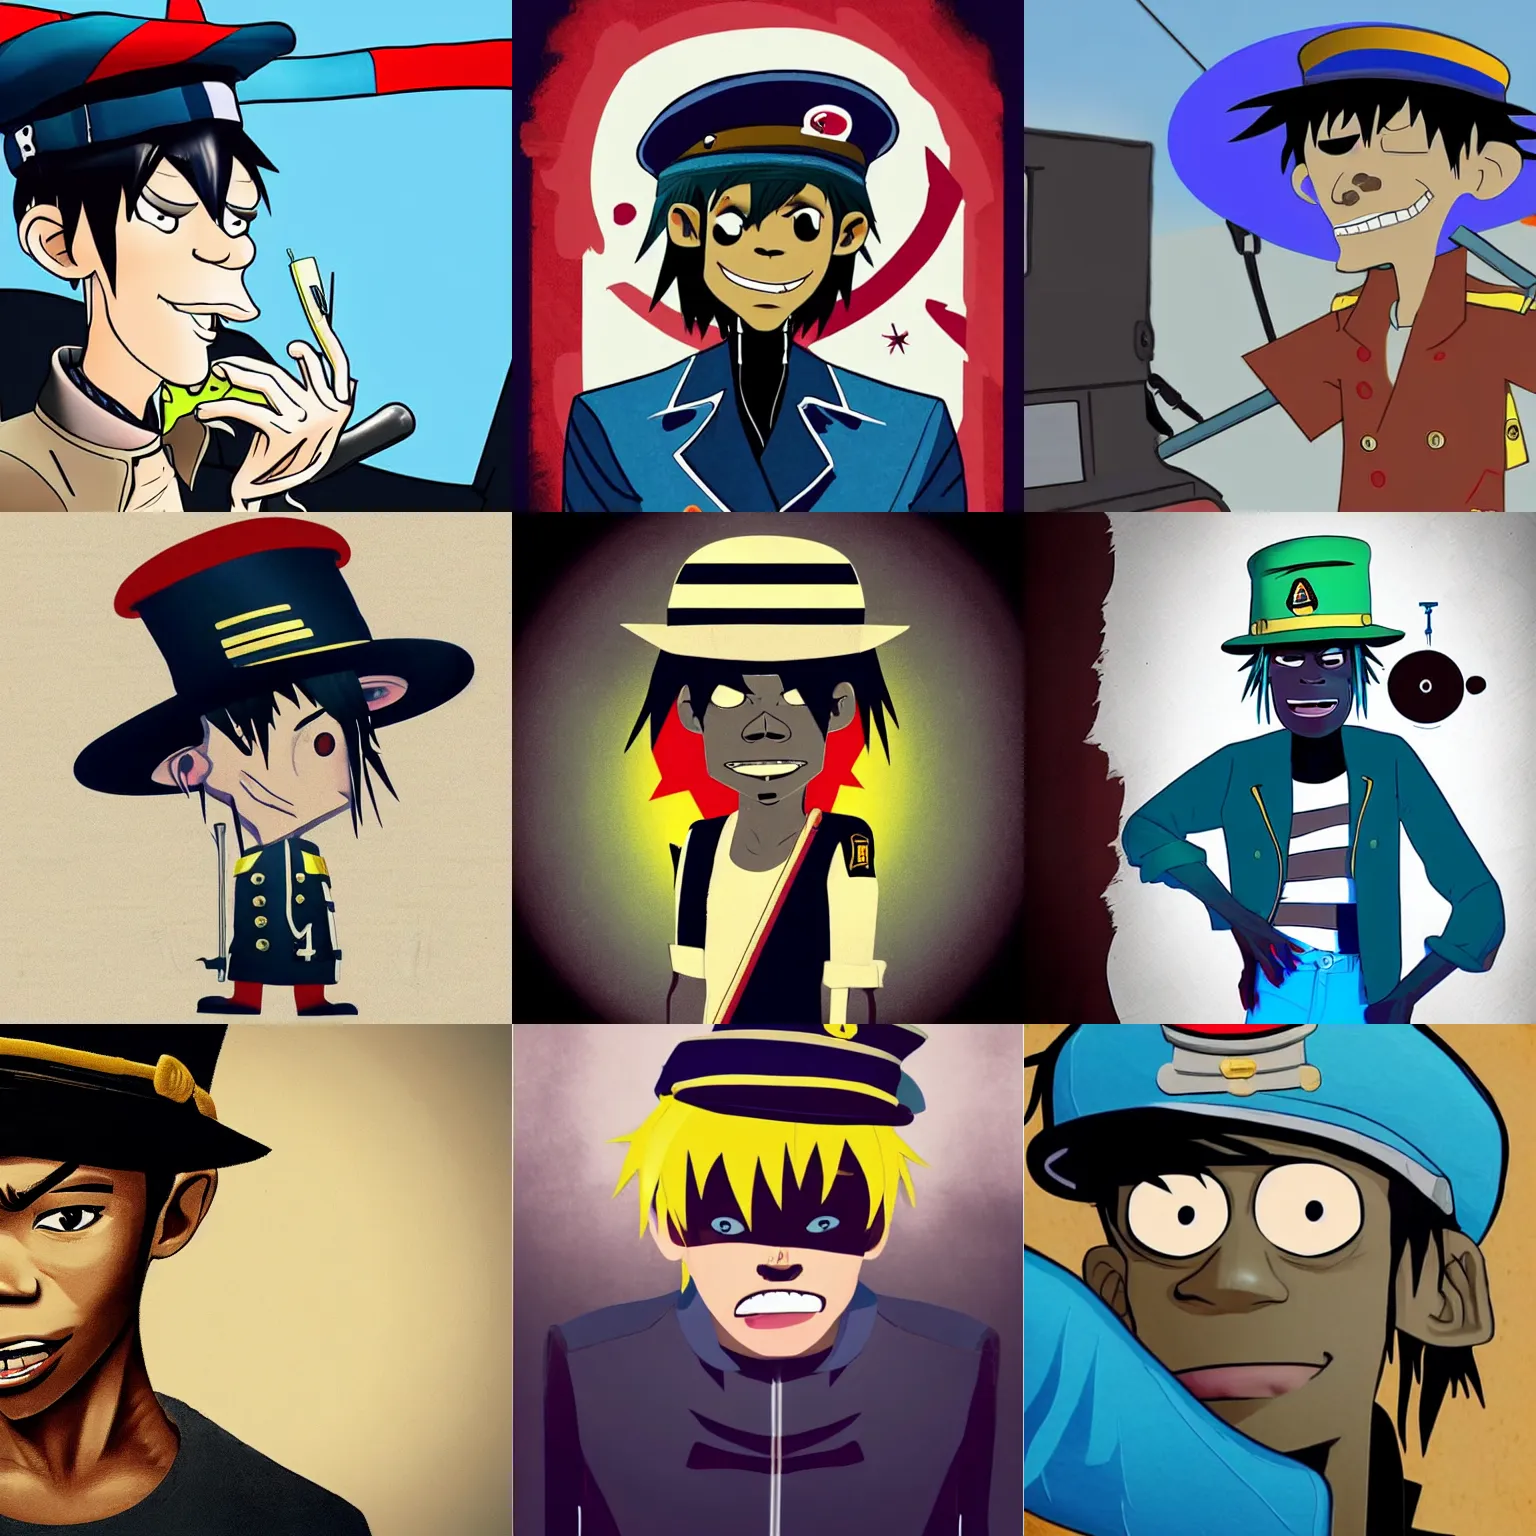 Prompt: 2d from gorillaz wearing a captain's hat on a boat